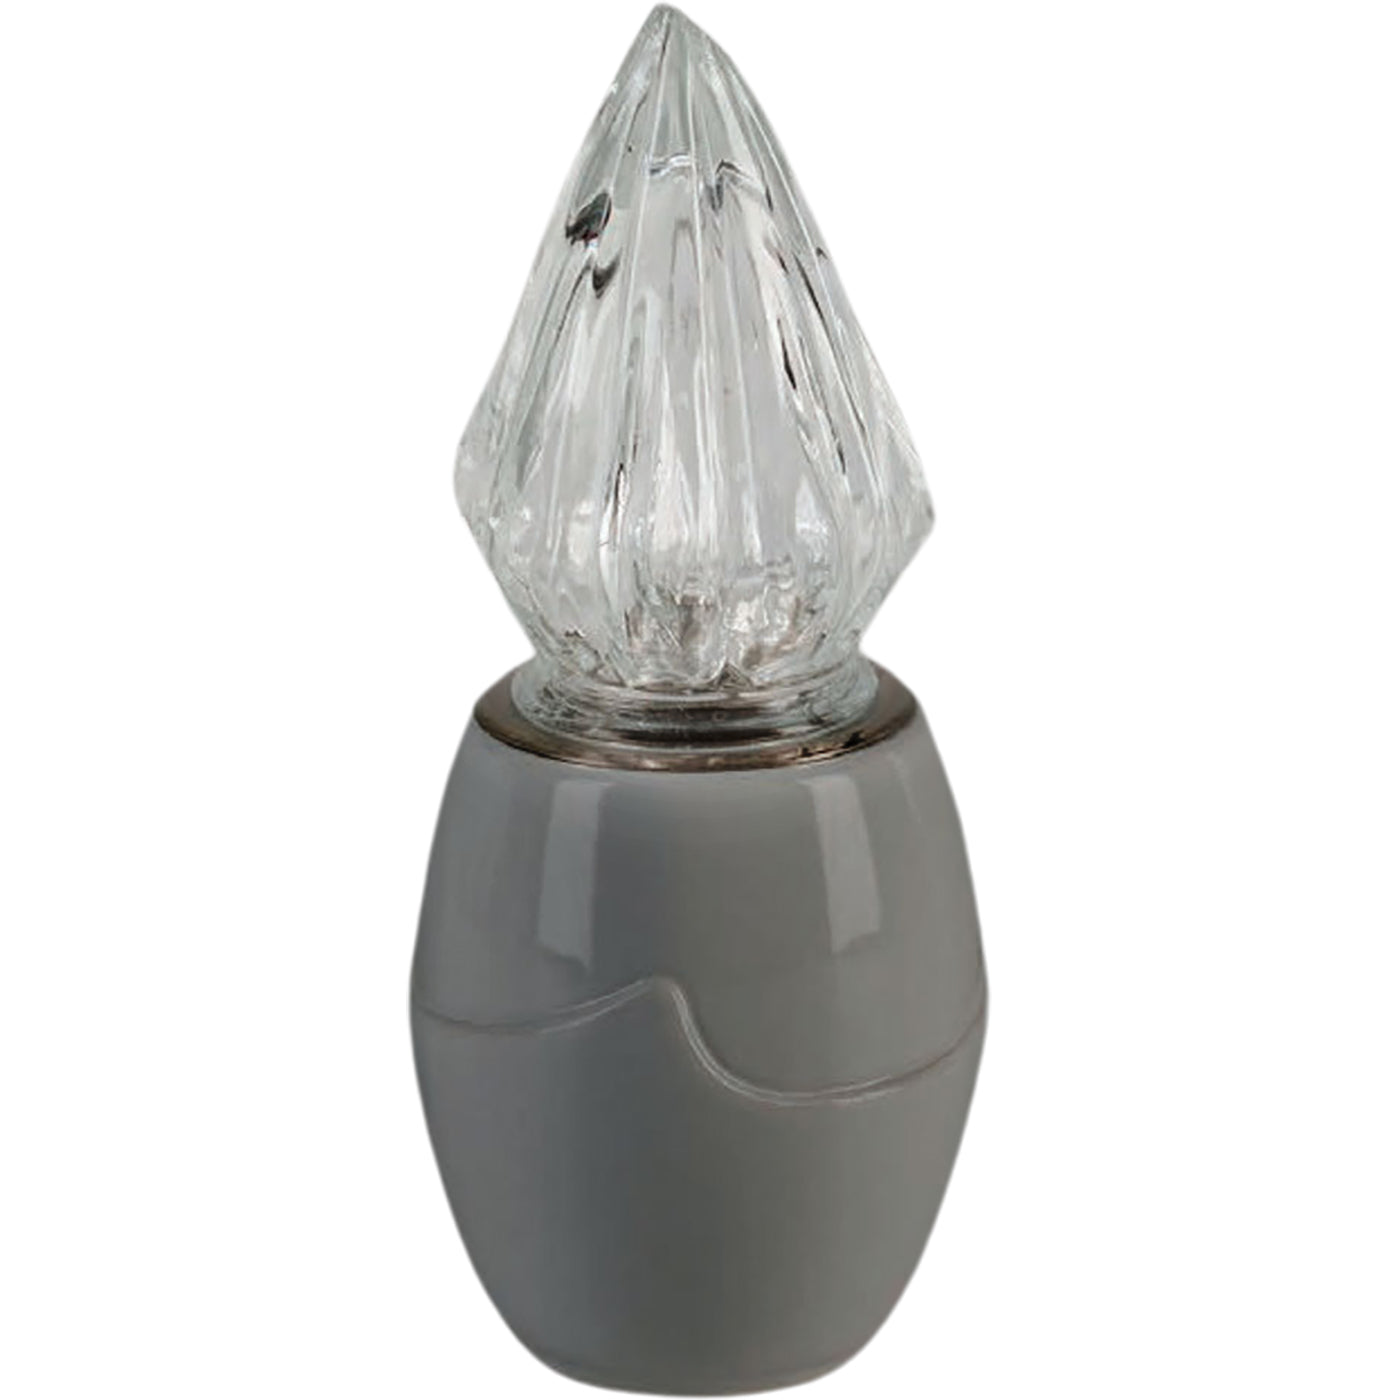 Grave light Onda gray 10x10cm - 3.9x3.9in In gray porcelain, ground attached ON170T/G